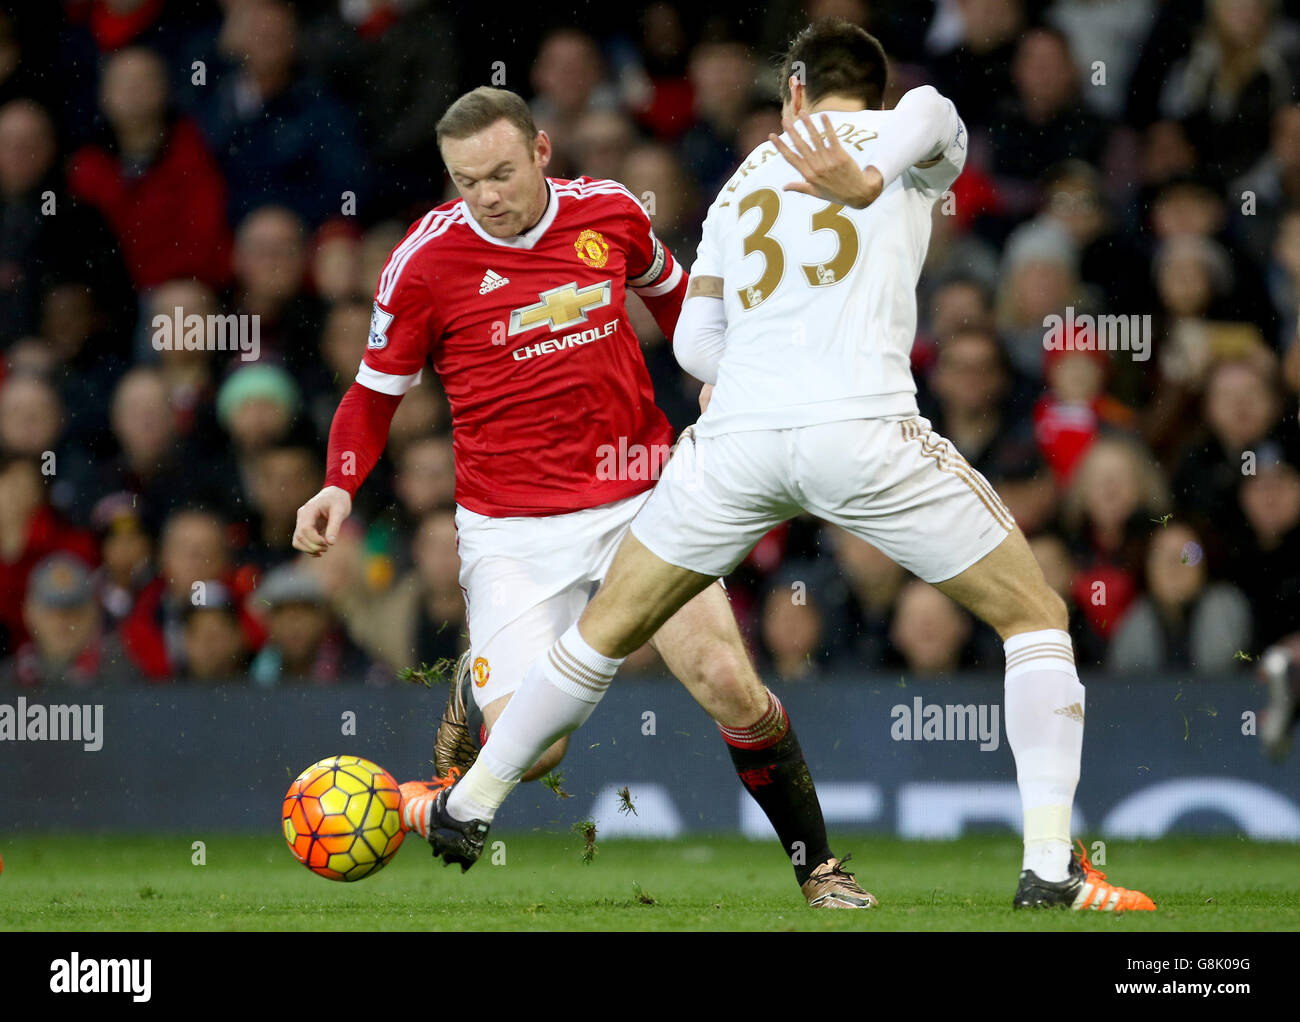 Manchester United v Swansea City - Barclays Premier League - Old Trafford. Swansea City's Federico Fernandez trips Manchester United's Wayne Rooney Stock Photo